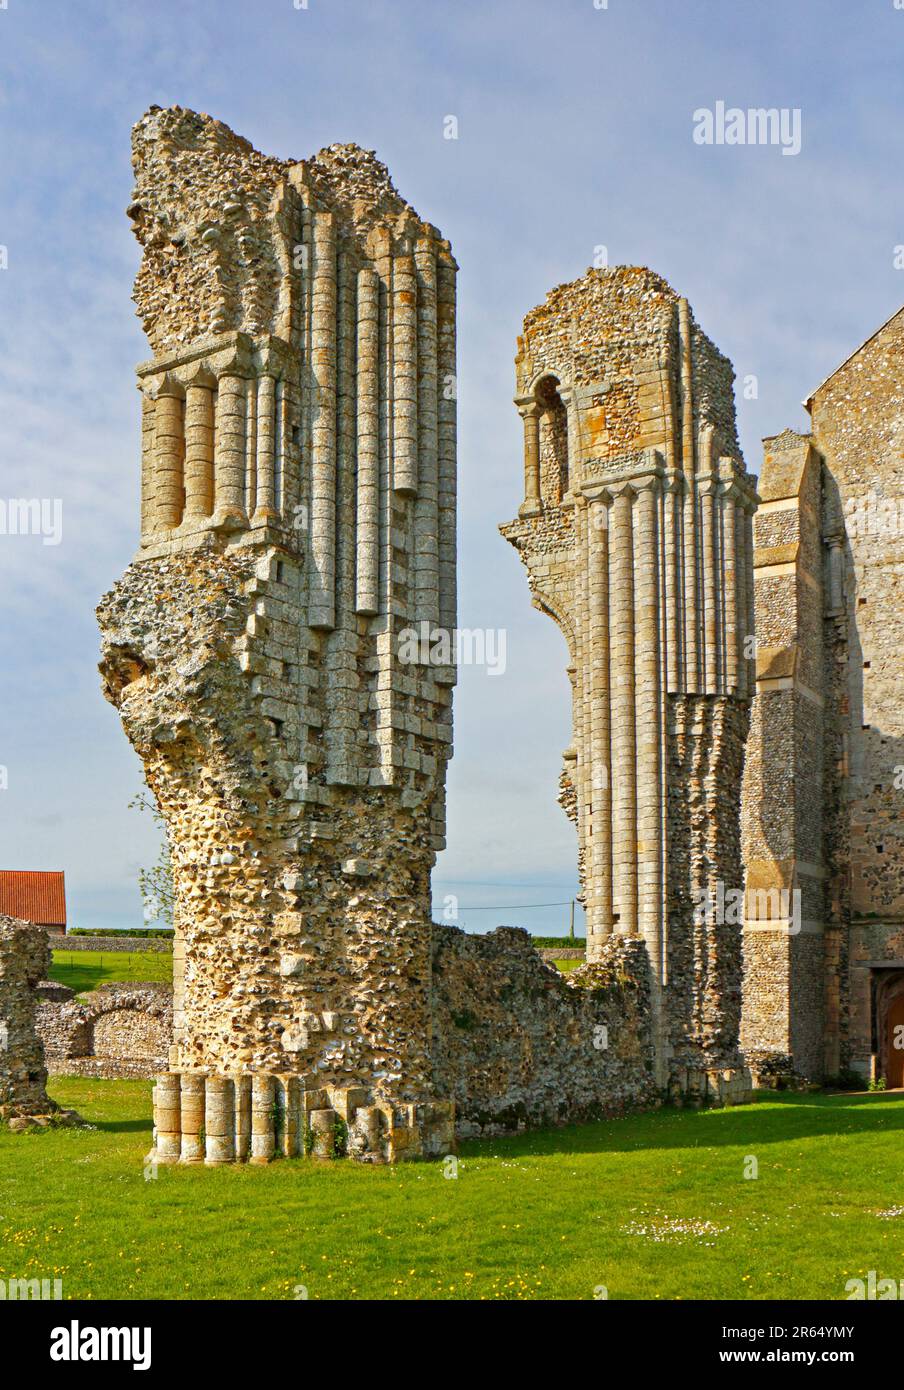 Details of architecture within the east end of the ruins of the Benedictine Priory in North Norfolk at Binham, Norfolk, England, United Kingdom. Stock Photo